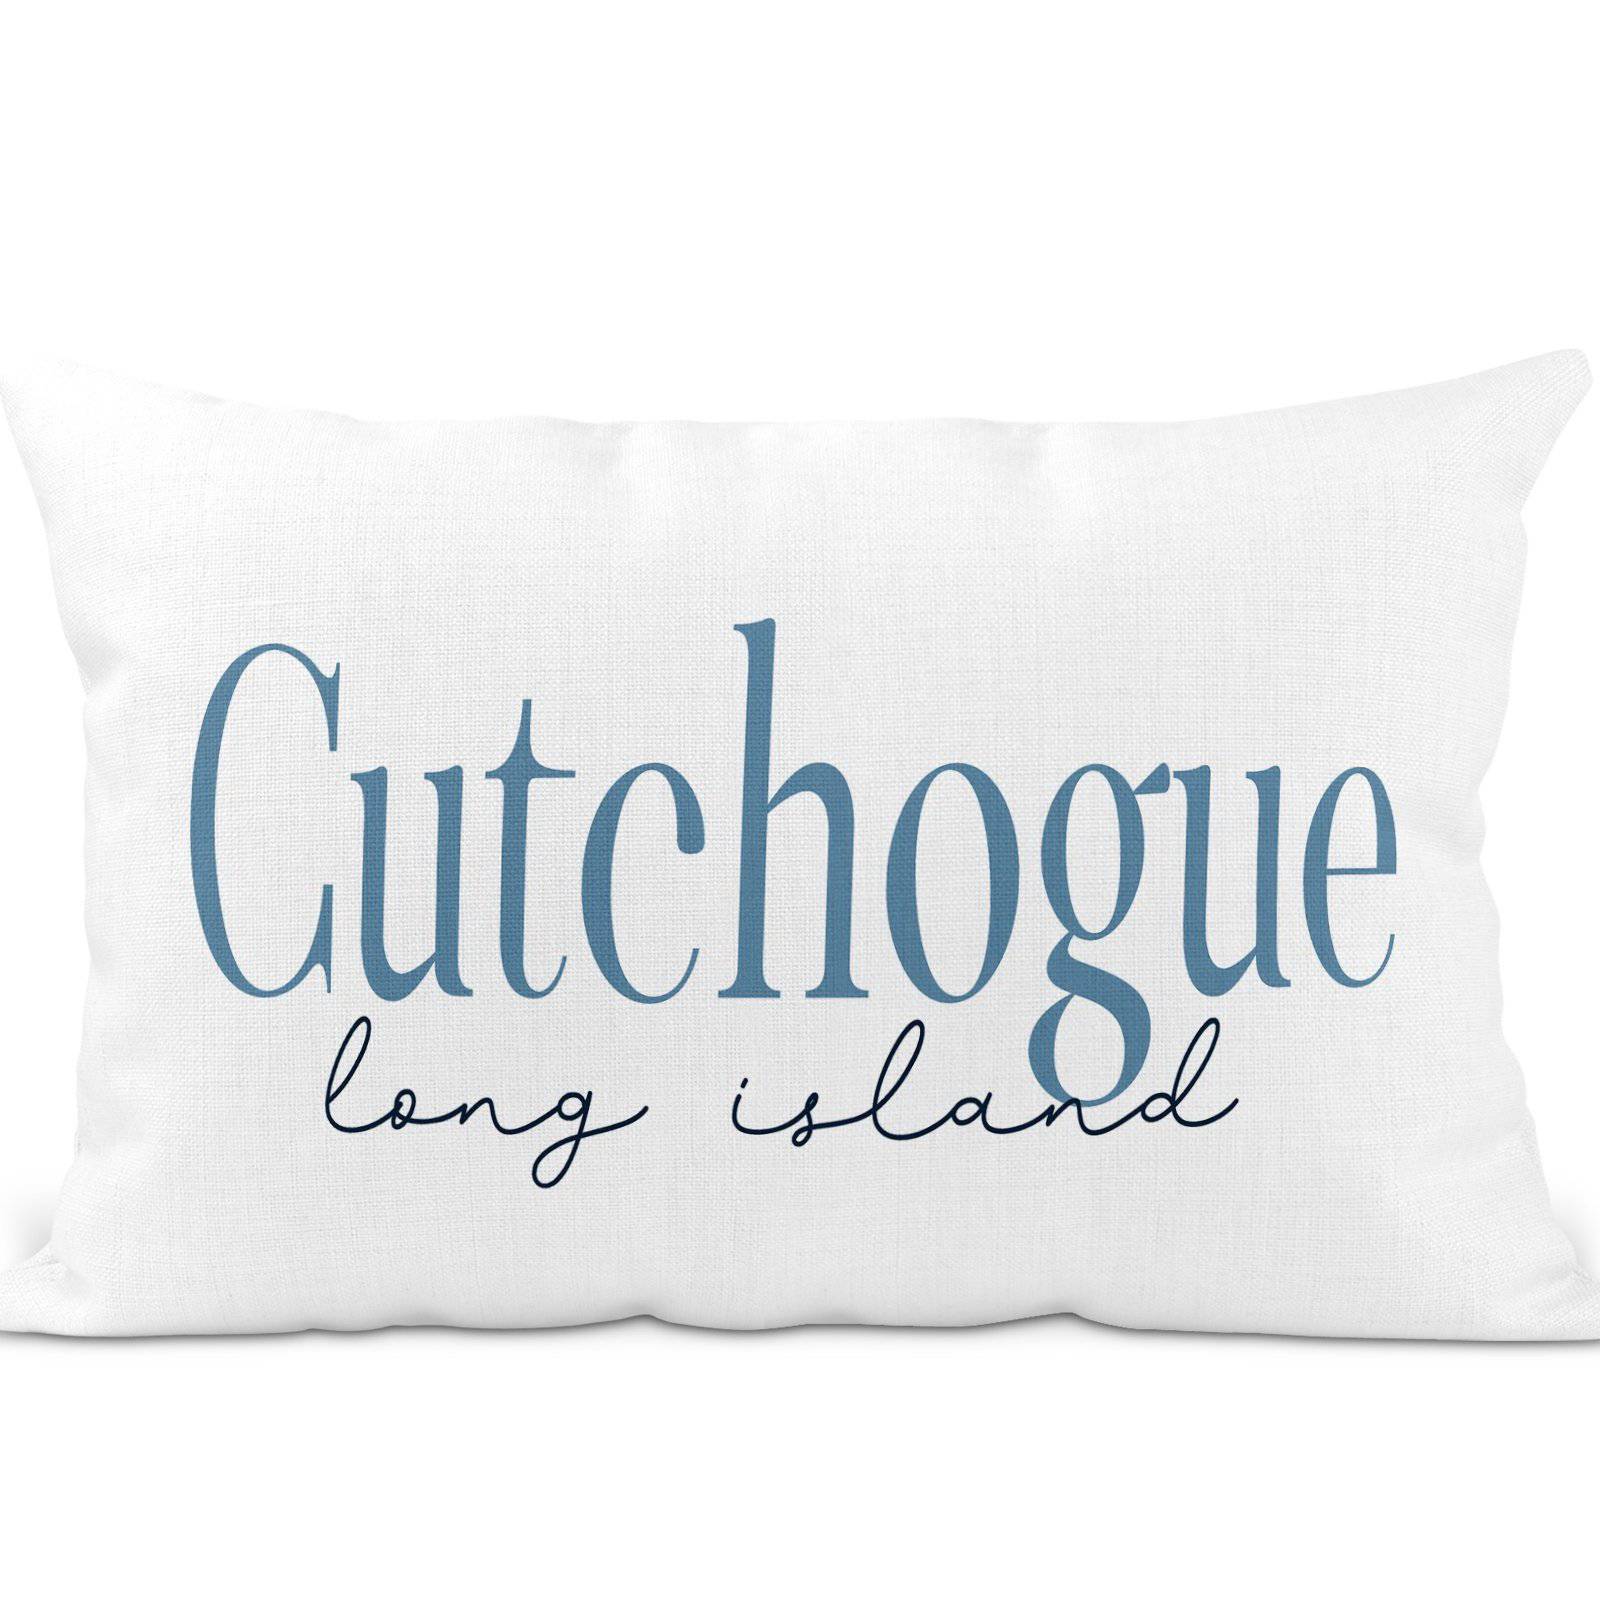 Cutchogue Long Island Pillow - Globally Crafted